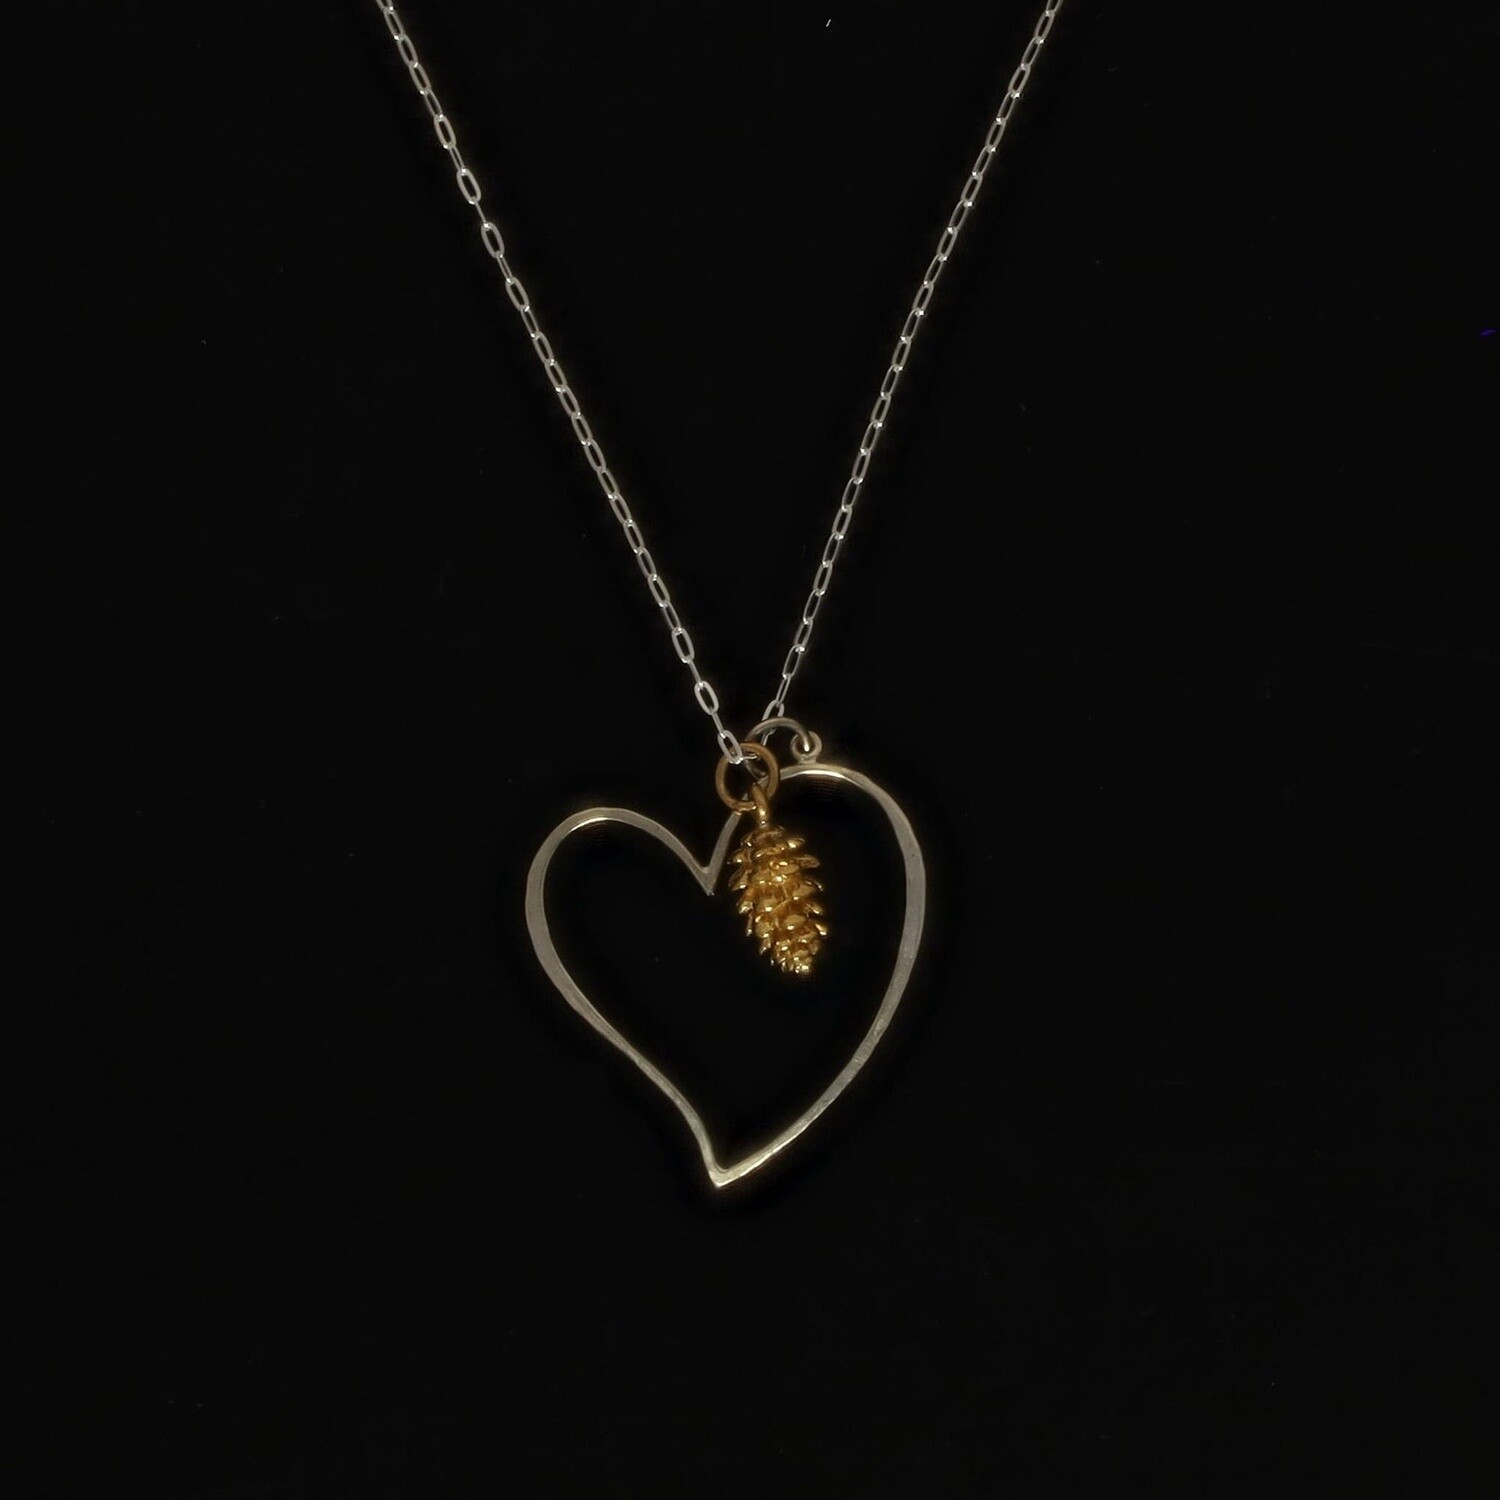 Heart & Pinecone Necklace